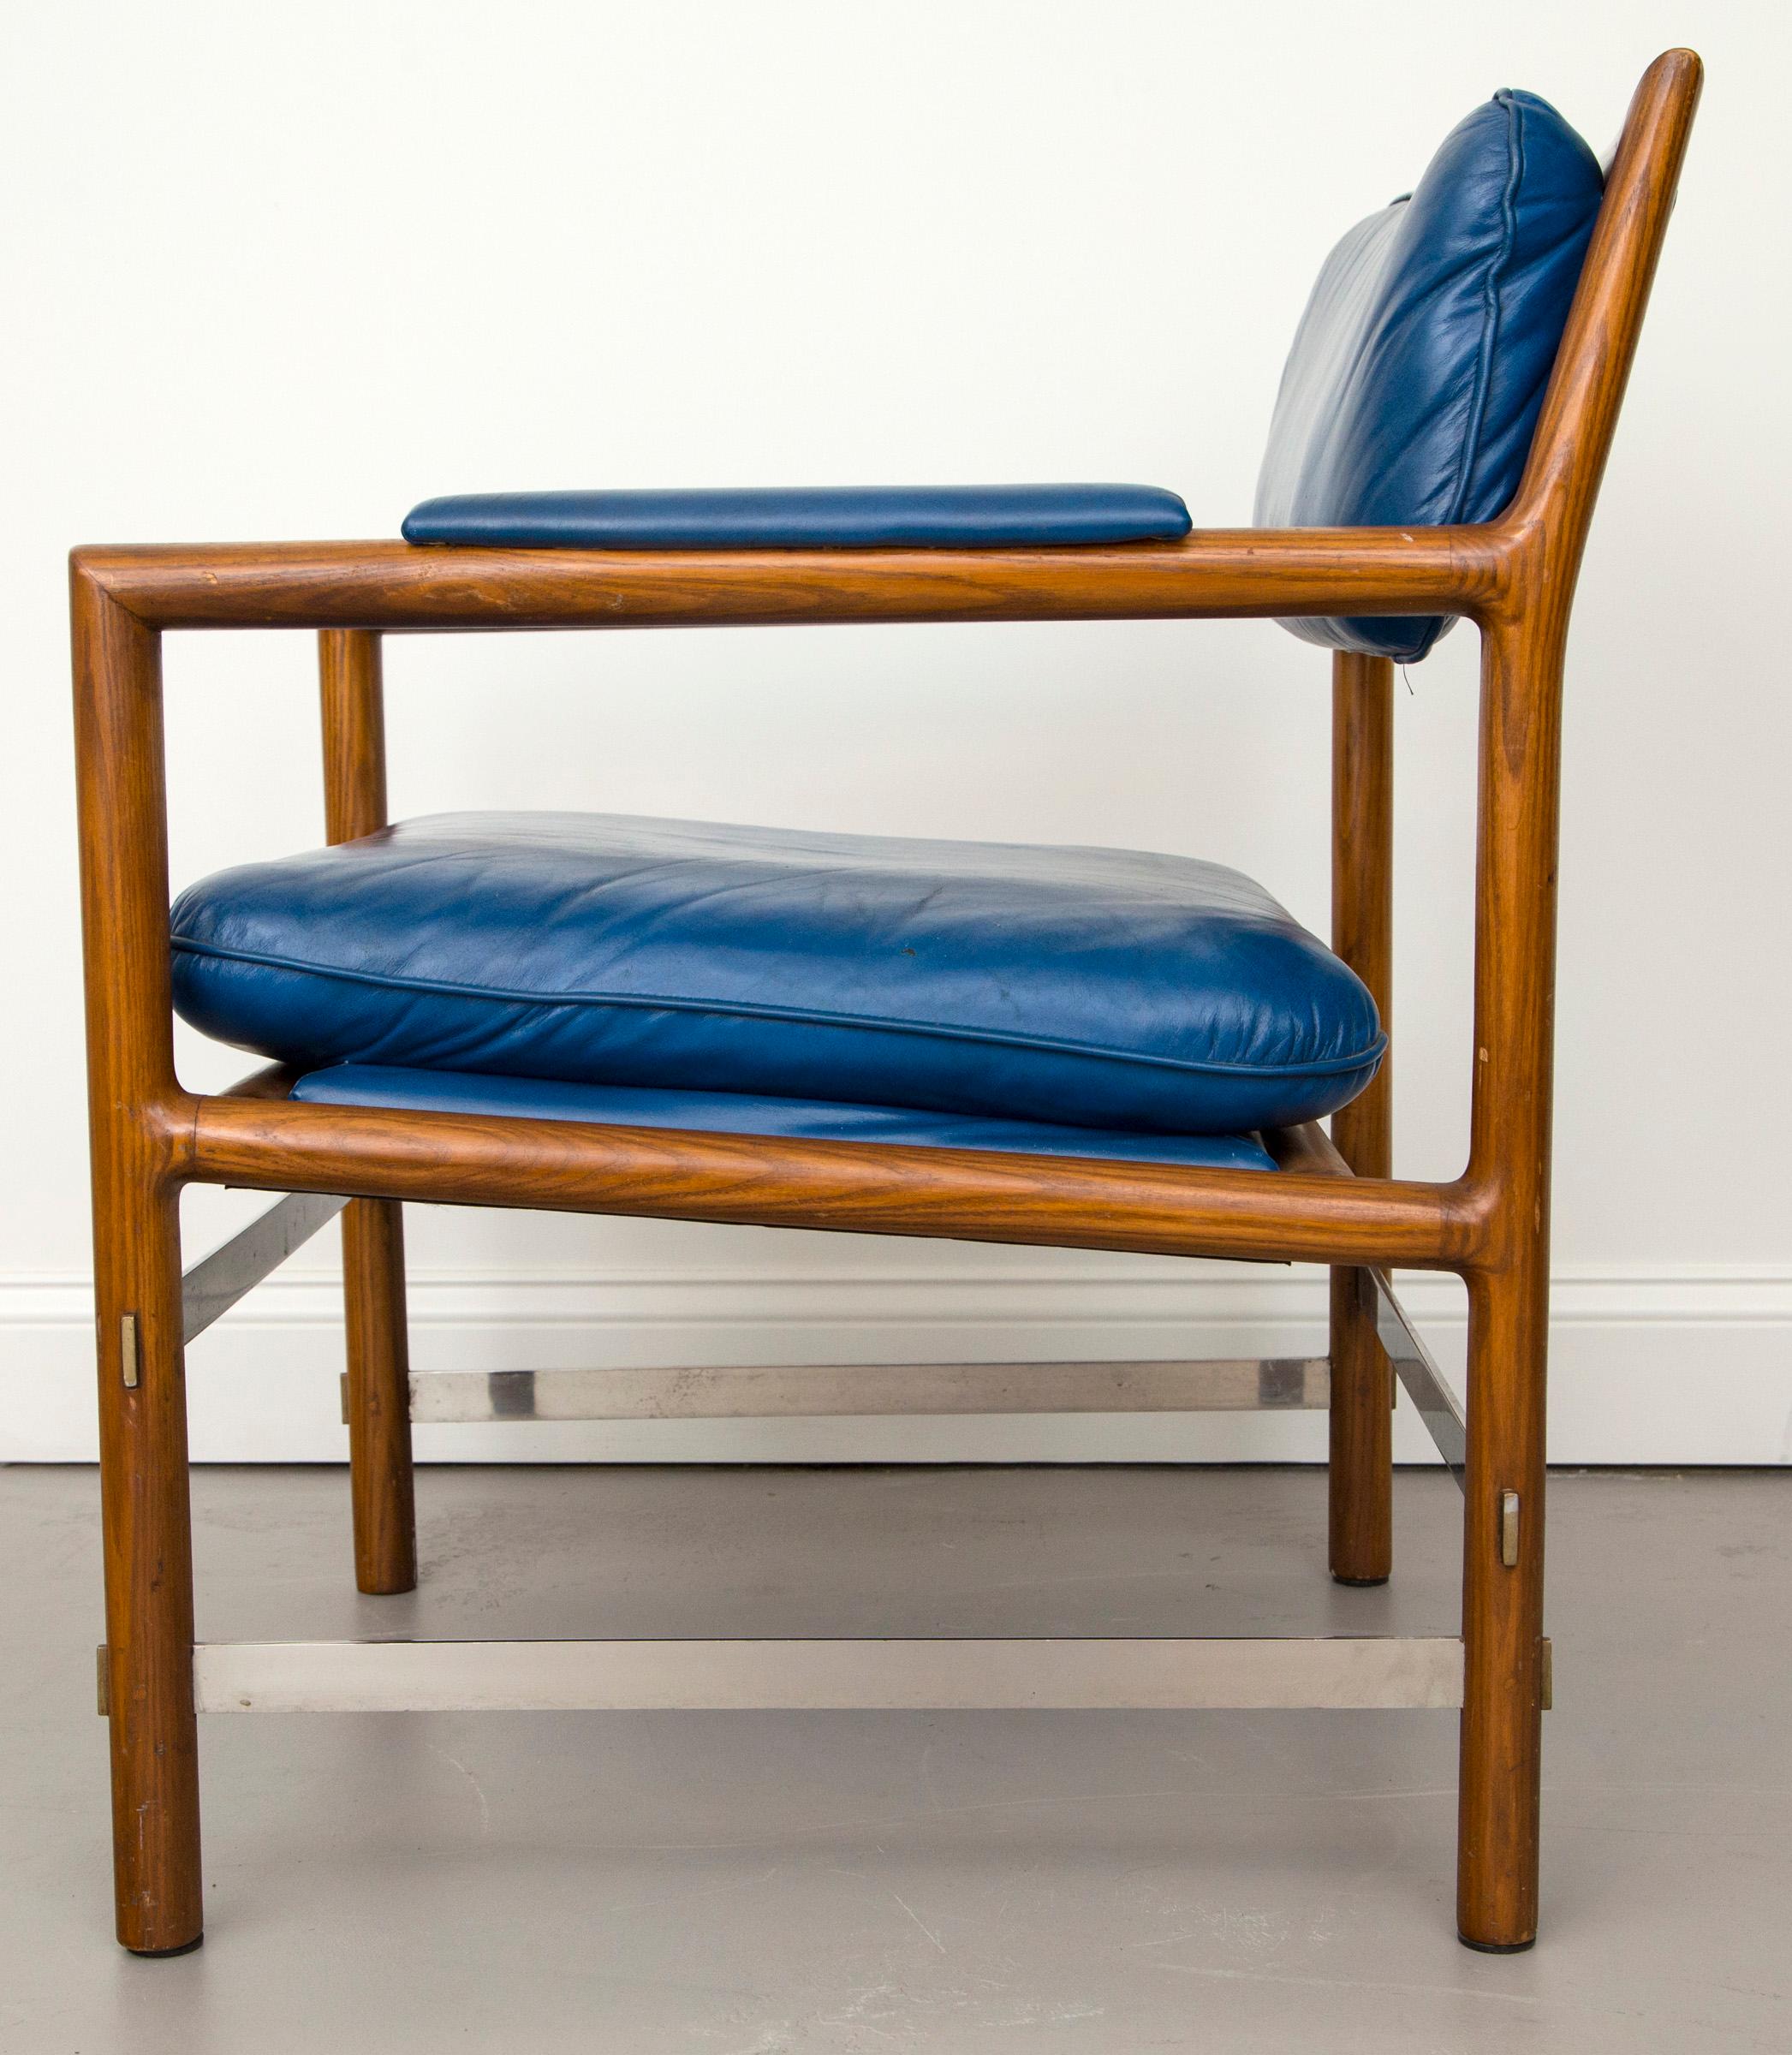 20th Century Ed Wormley for Dunbar Blue Leather, Wood and Stainless Steel Chairs, Set of 4